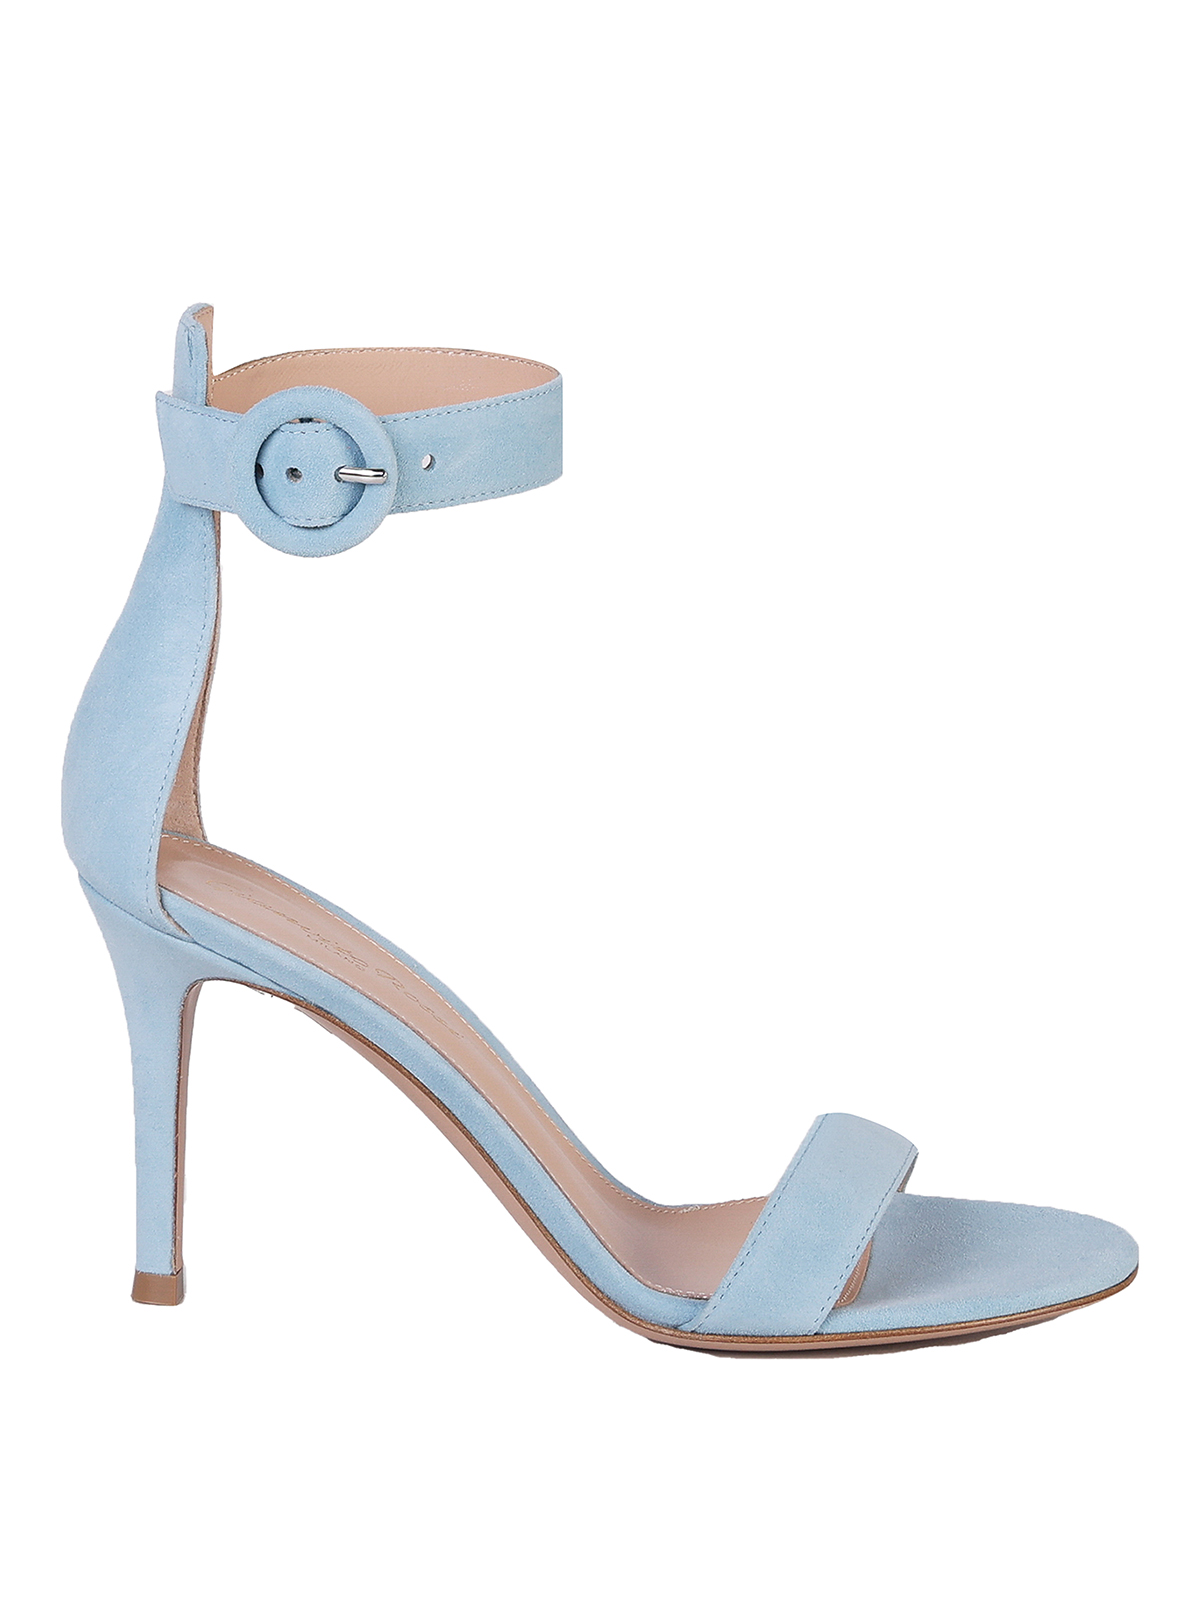 Gianvito Rossi Suede Sandals With Ankle Strap In Azul Claro